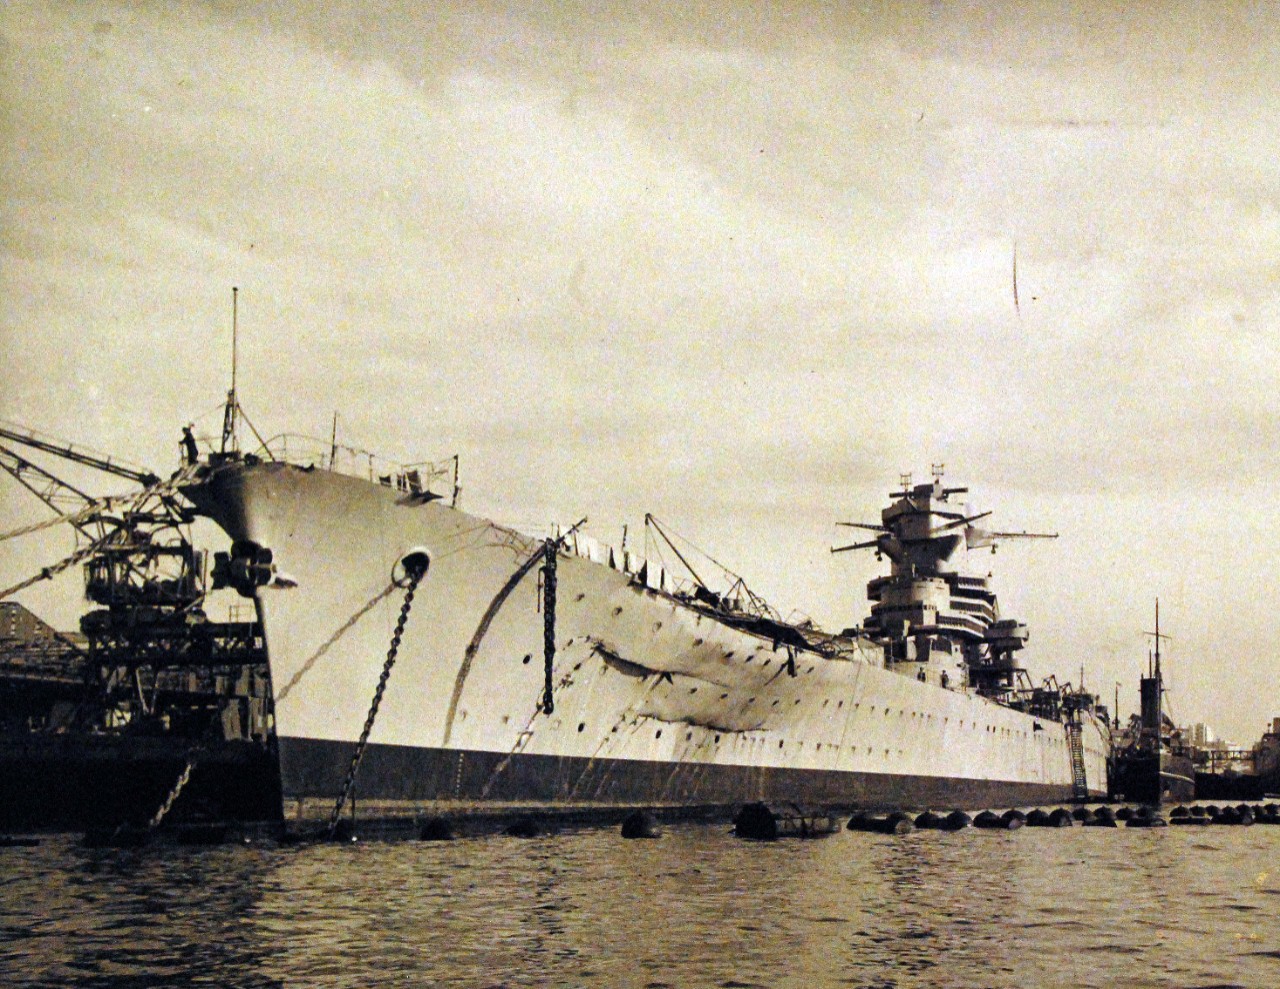 <p>80-G-30616: Operation Torch, November 1942. French battleship Jean Bart damaged from shell fire and bombs during the operation.&nbsp;</p>
